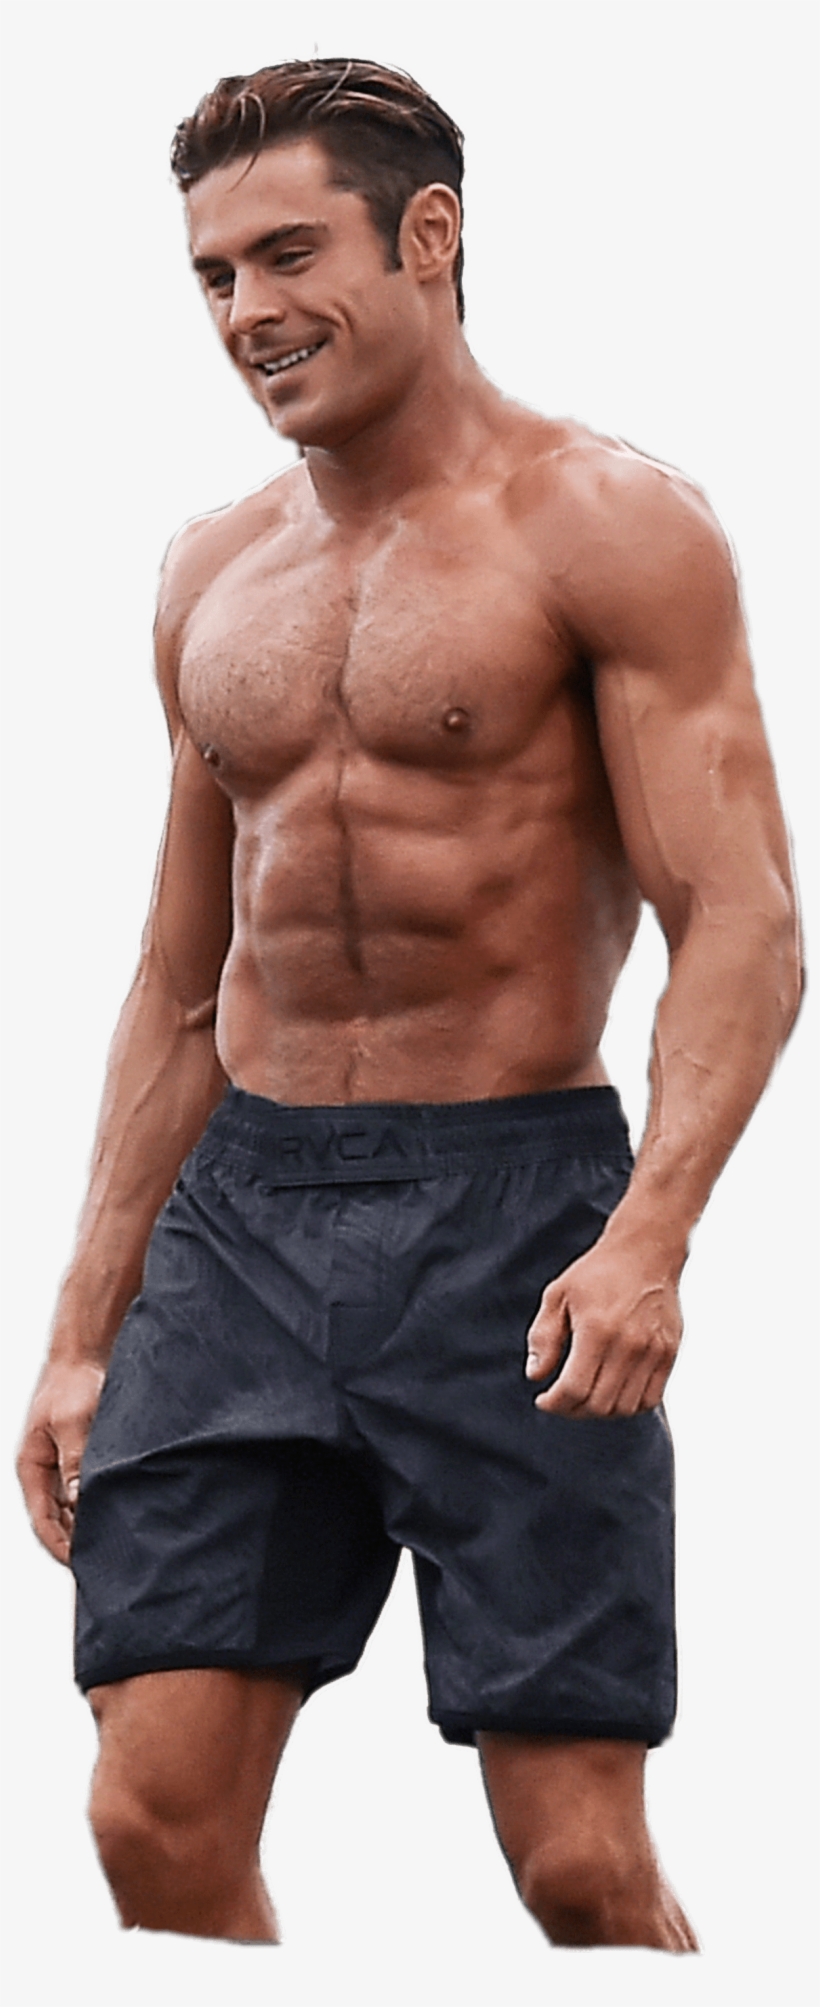 At The Movies - Zac Efron En Baywatch, transparent png #1745470